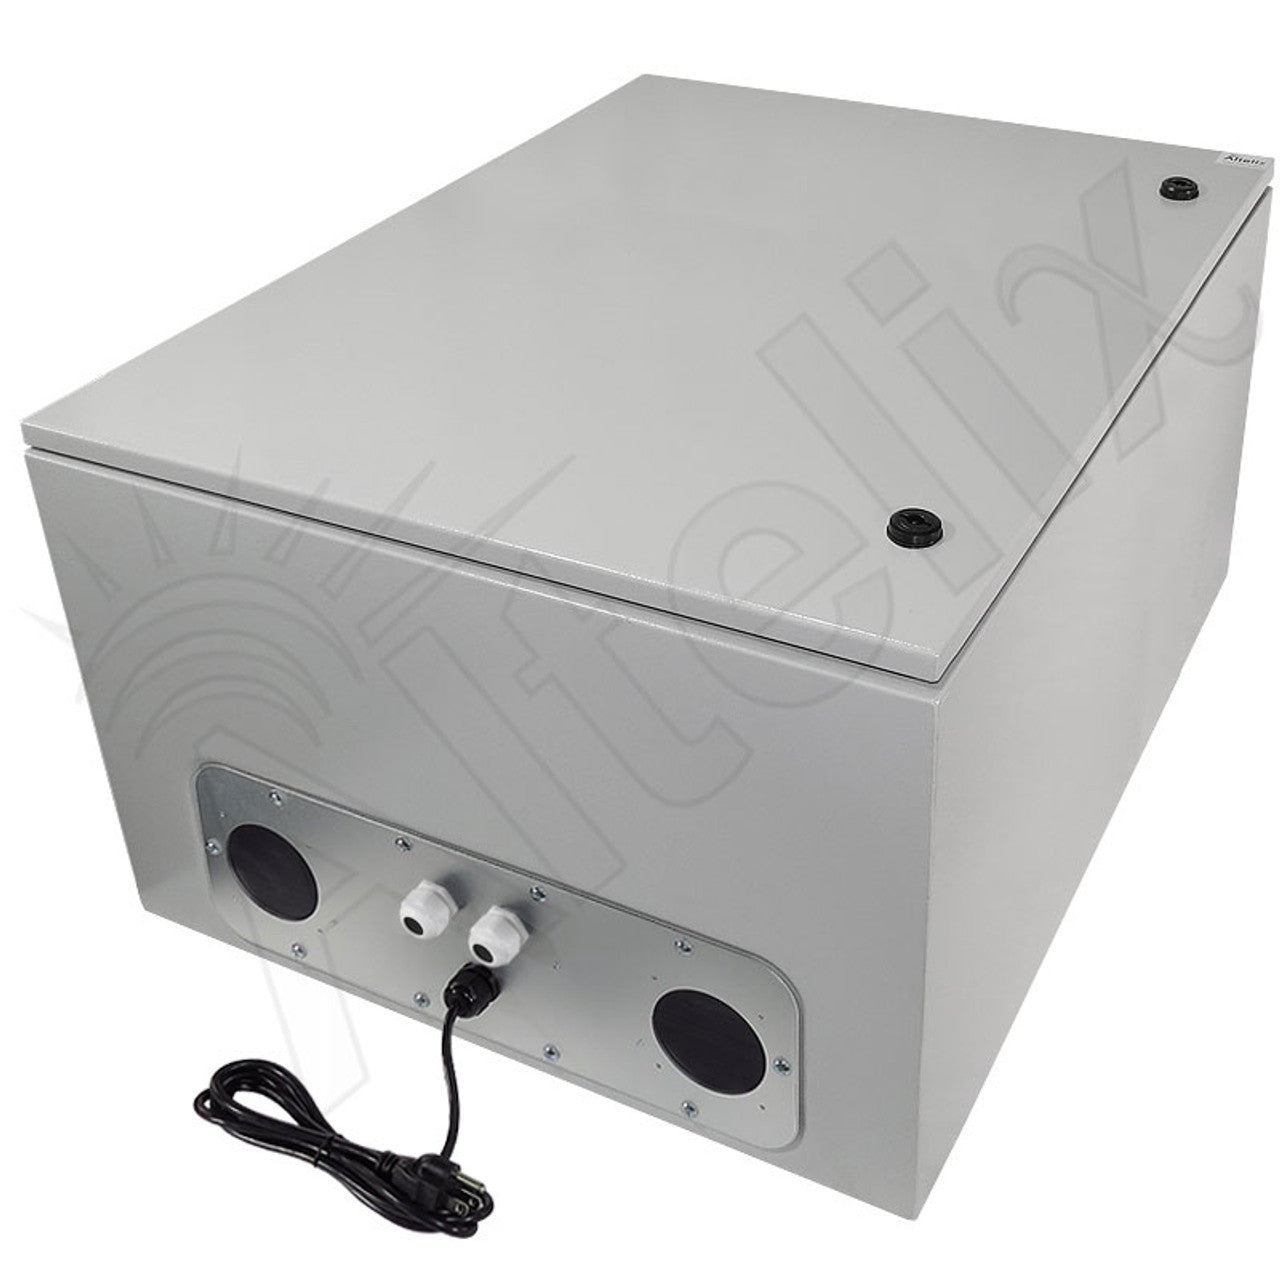 Altelix Steel Weatherproof NEMA Enclosure with 120 VAC Outlets, Power Cord & 85°F Turn-On Cooling Fan